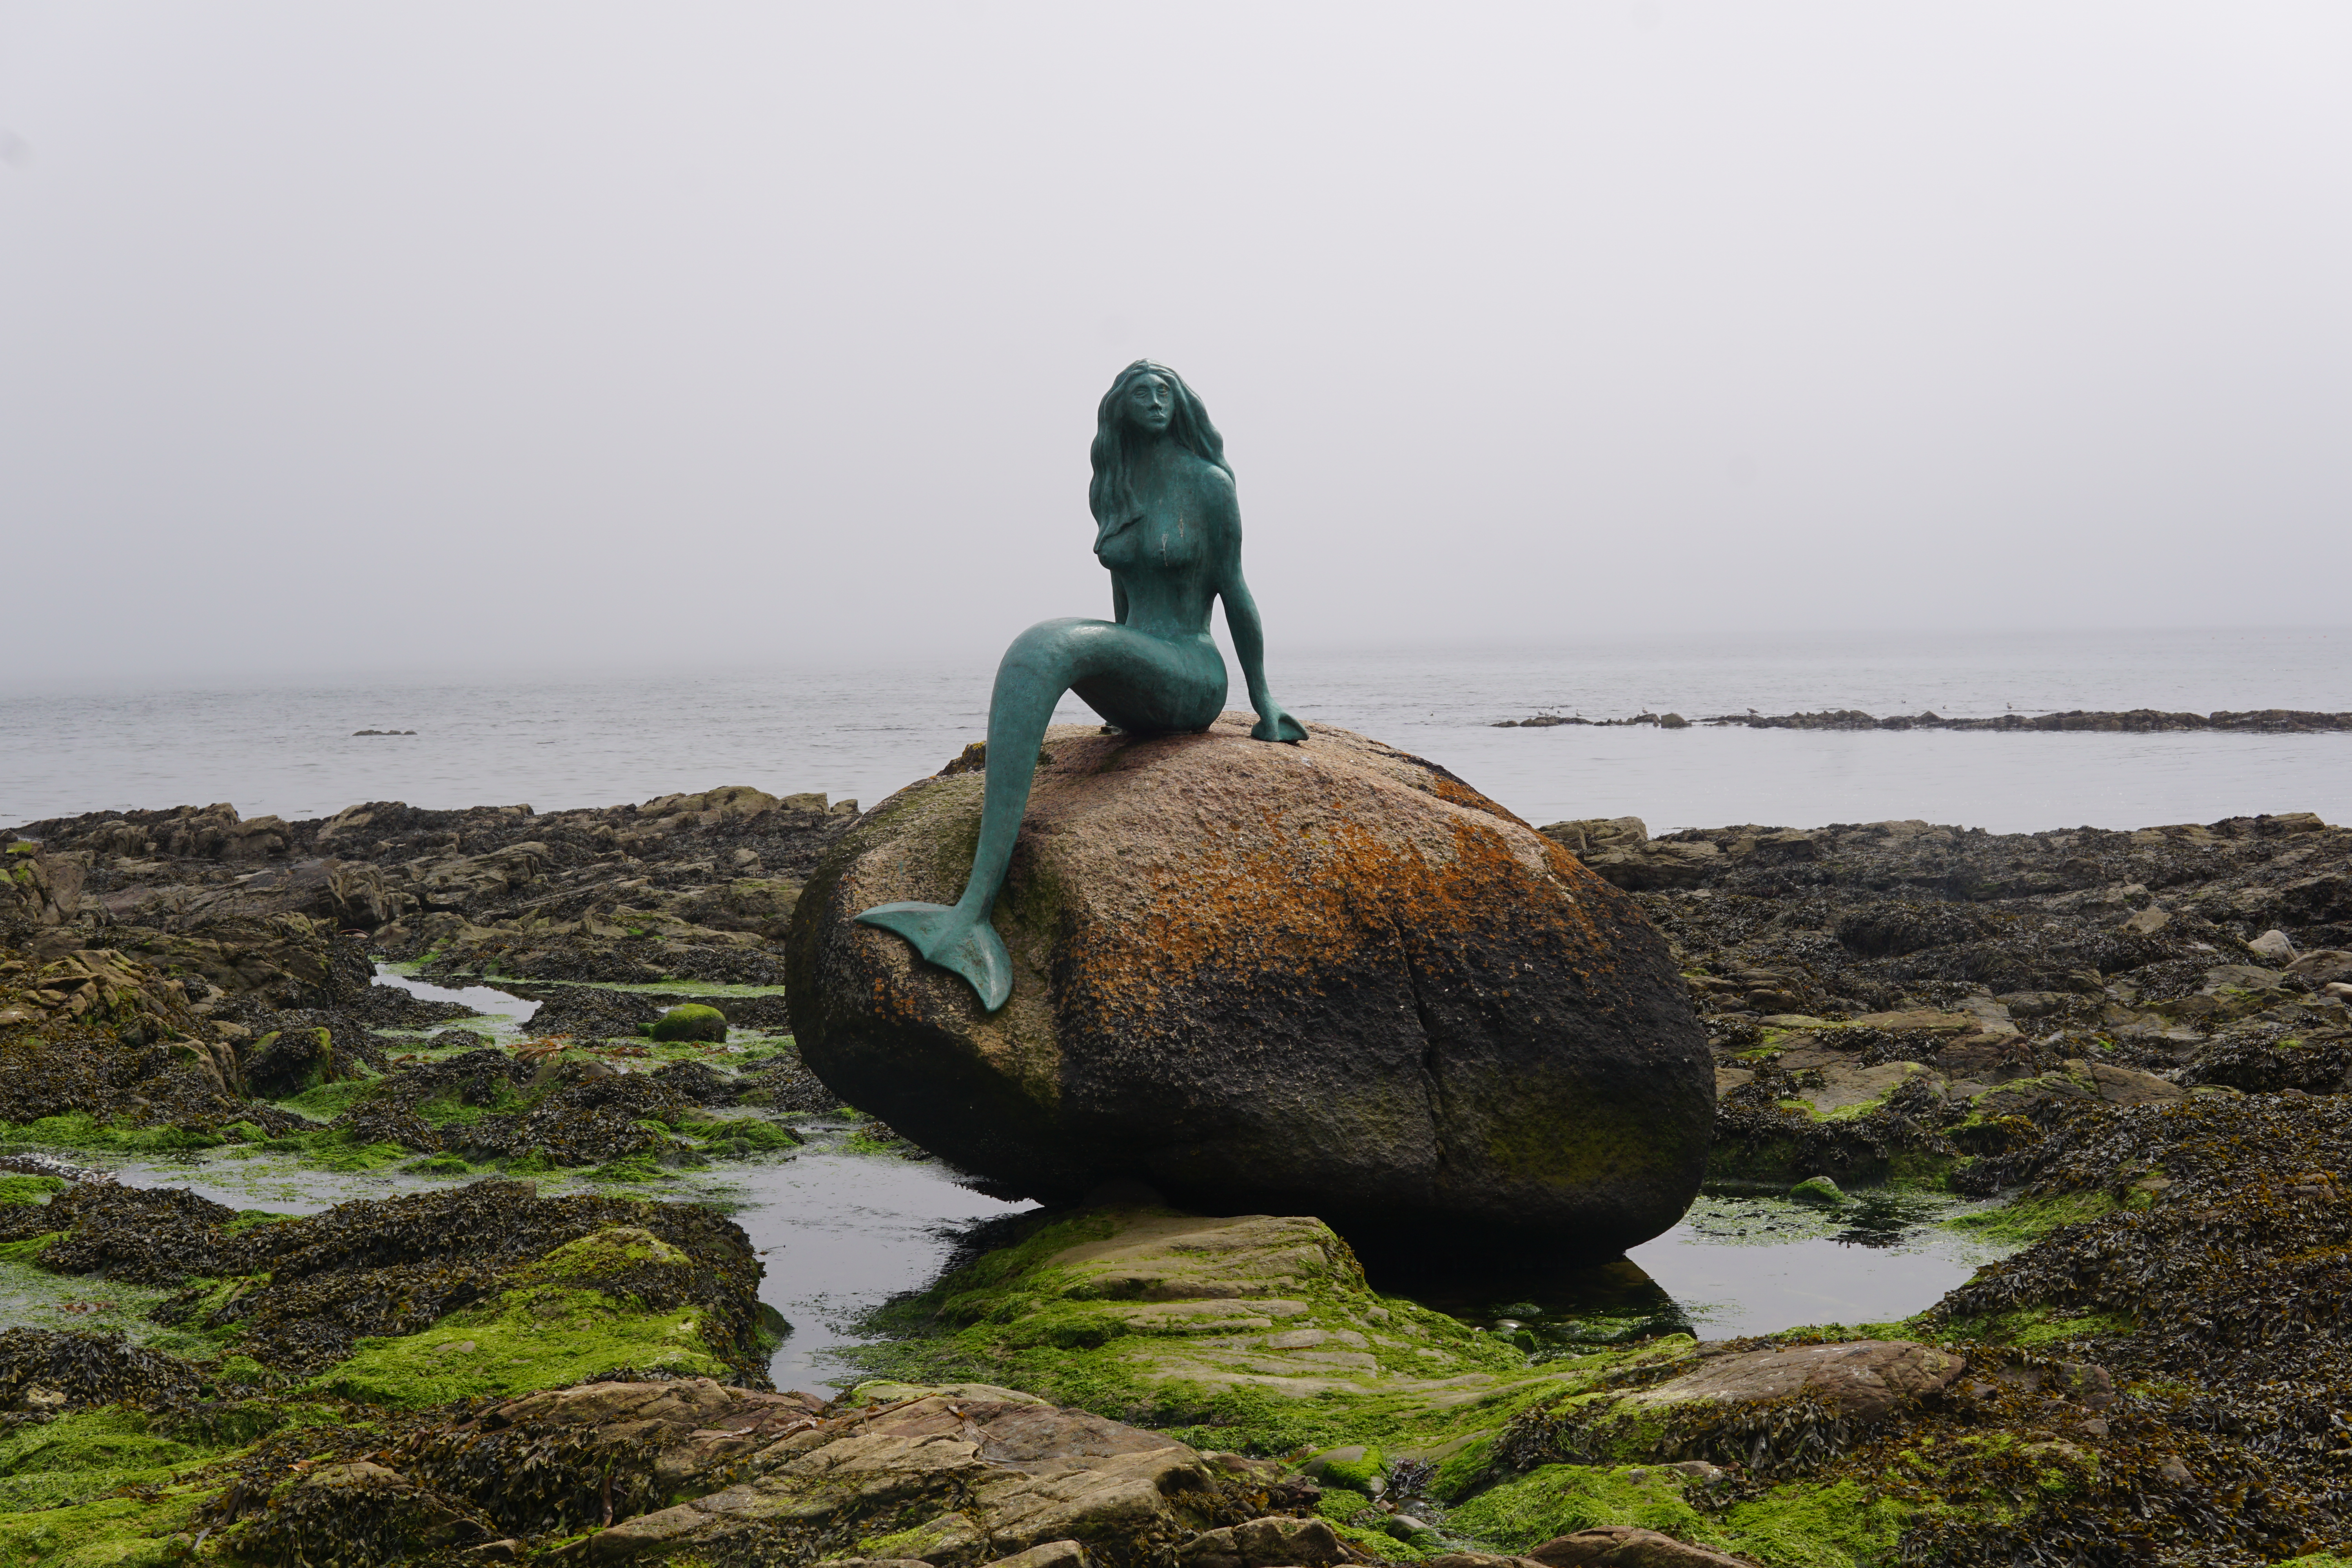 An image of the Mermaid of the North in Balintore